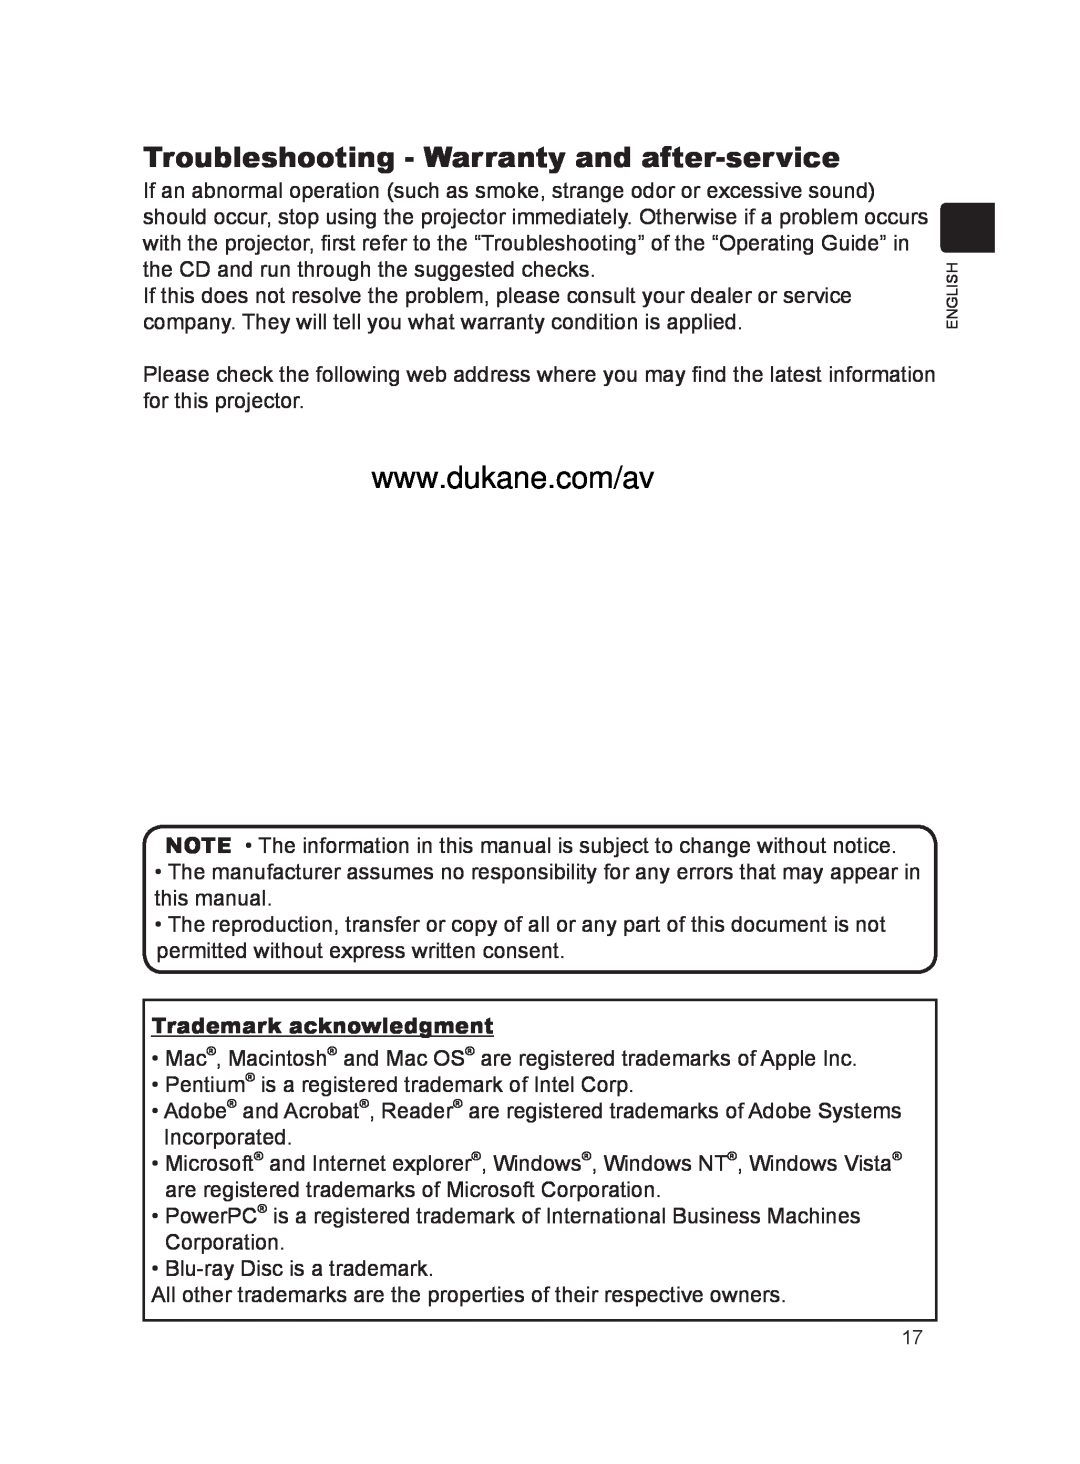 Dukane MODEL 8788 user manual Troubleshooting - Warranty and after-service, Trademark acknowledgment 